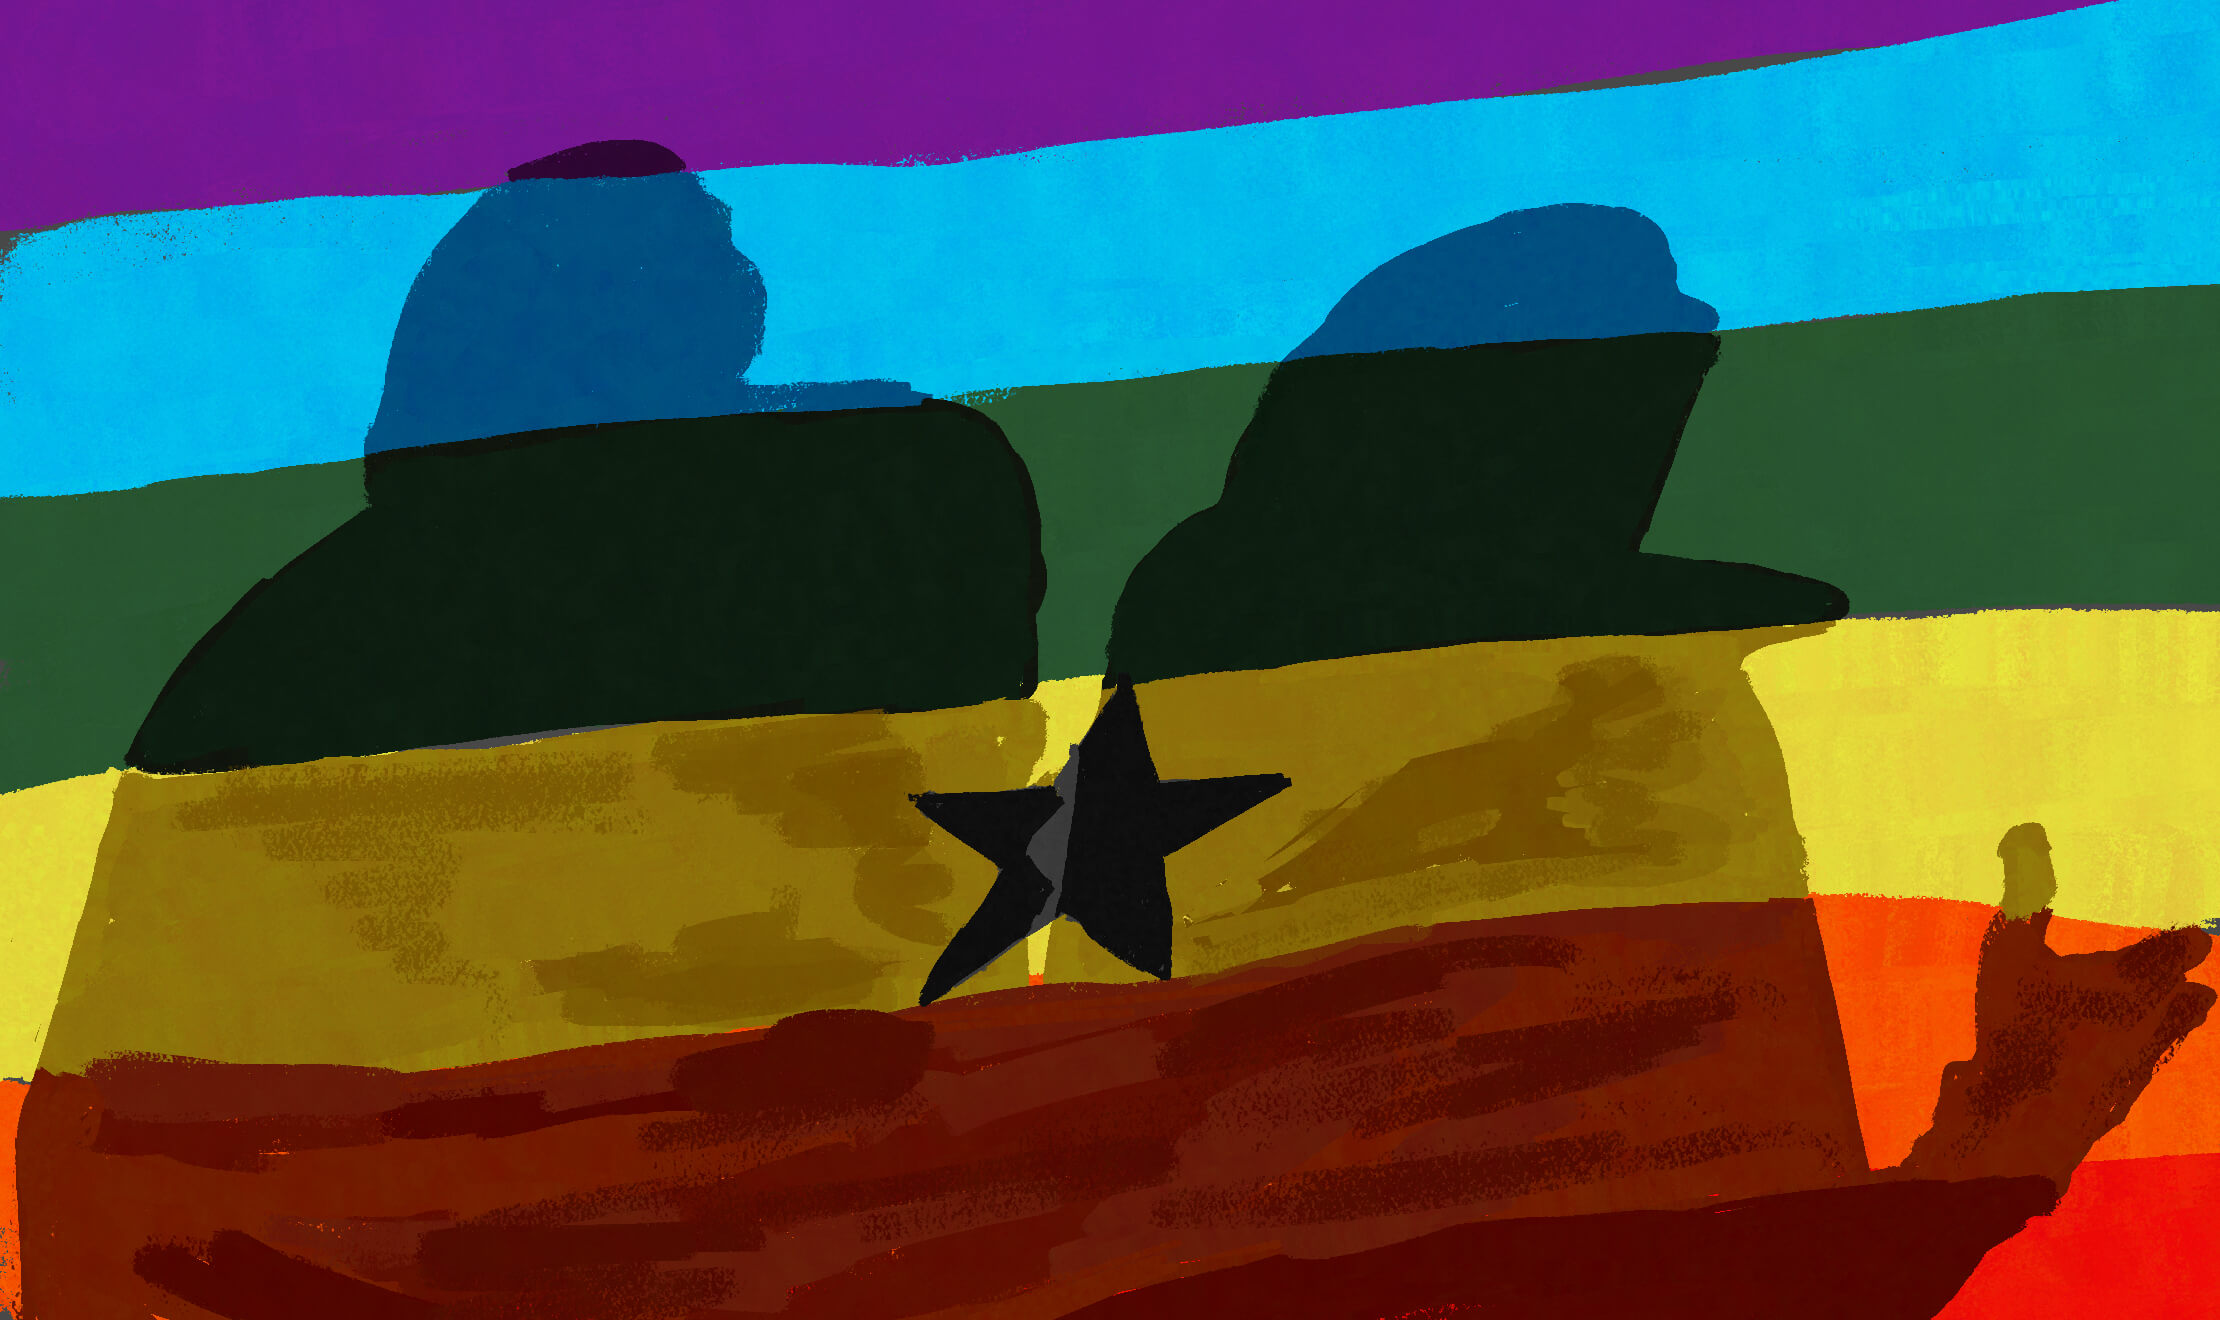 Hope is quashed: what it’s like being queer in Ghana right now